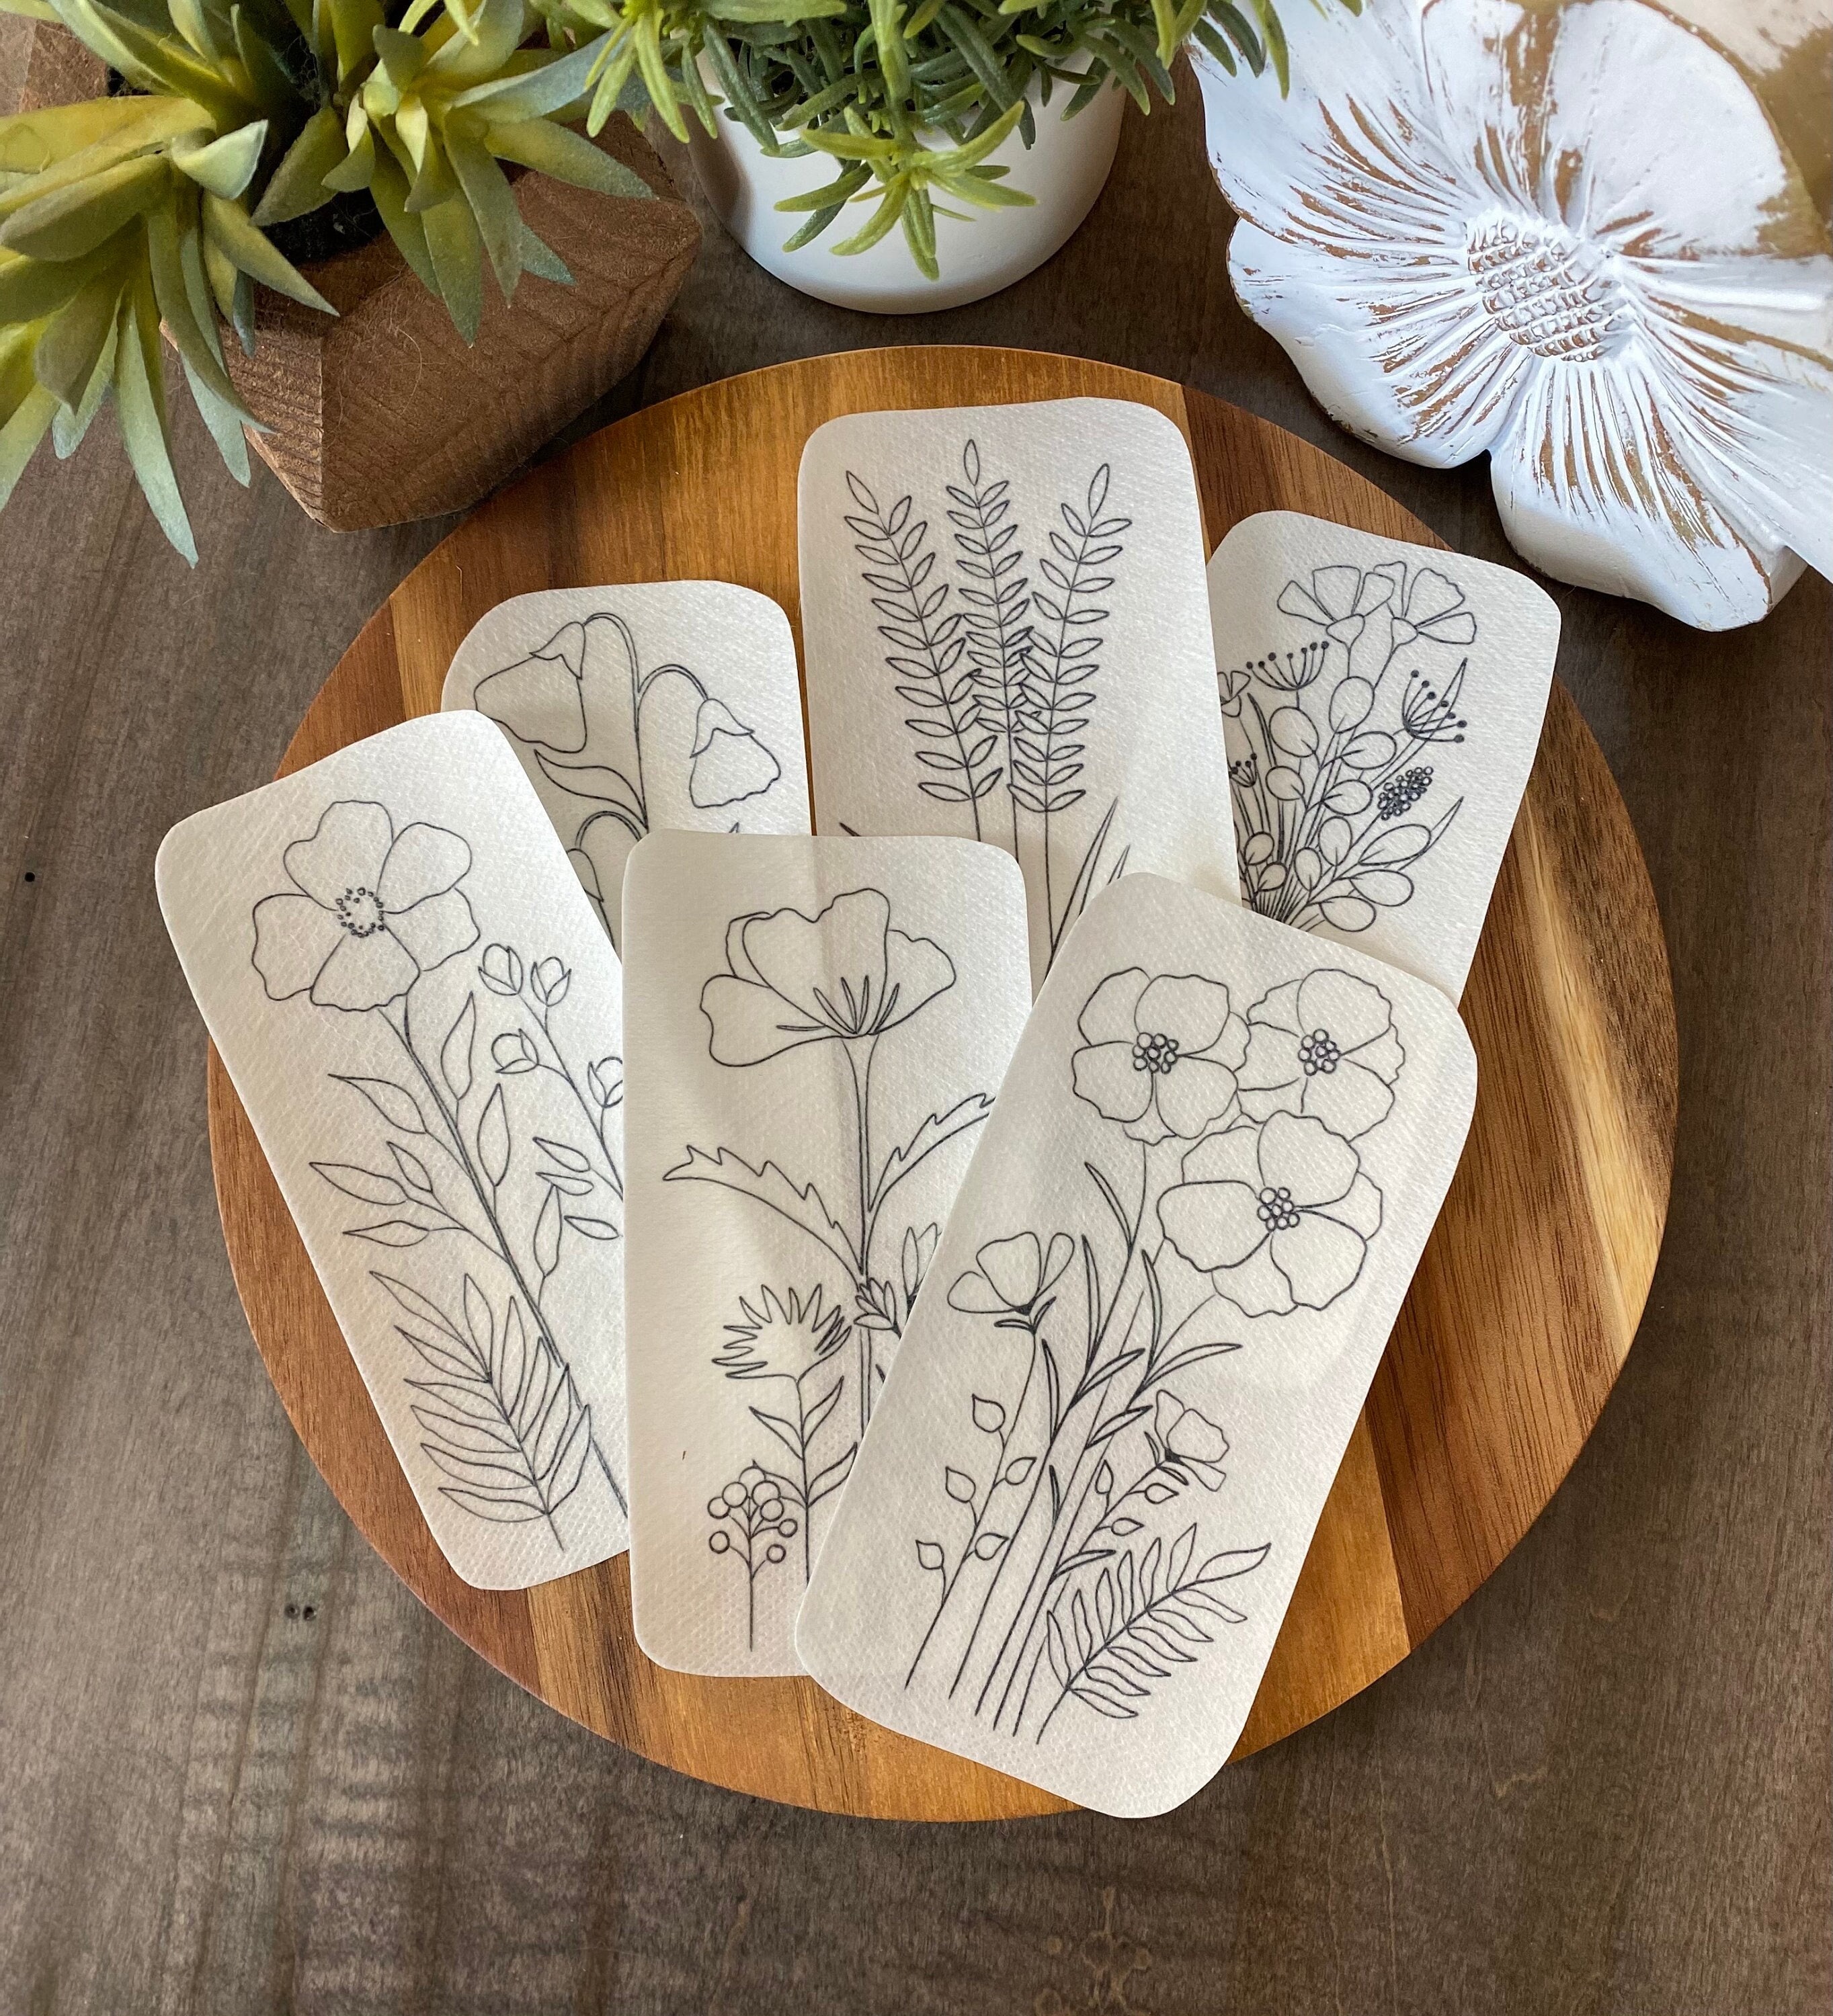 100pcs Water Soluble Stabilizer for Embroidery Hand, Stick and Stitch Embroidery Paper, Embroidery Patterns Transfers with Flower Plant Patterns for